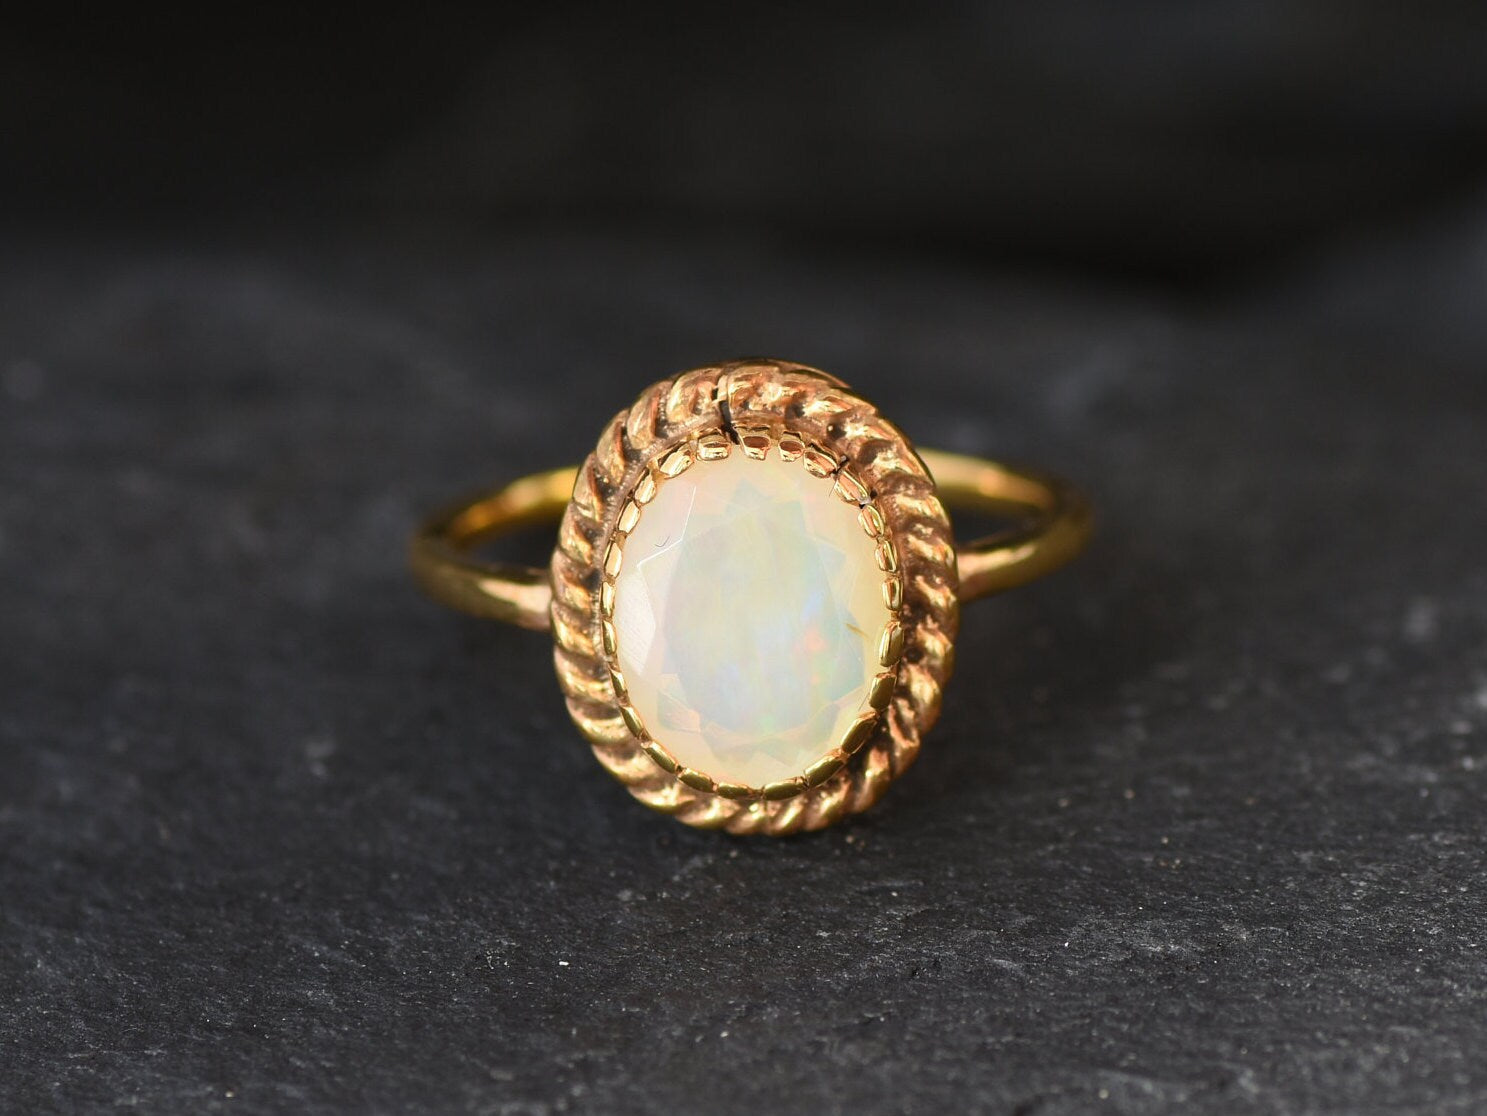 Gold Opal Ring, Ethiopian Opal Ring, October Birthstone, Victorian Ring, Fire Opal Ring, Rainbow Opal Ring, Genuine Opal Ring, Gold Vermeil